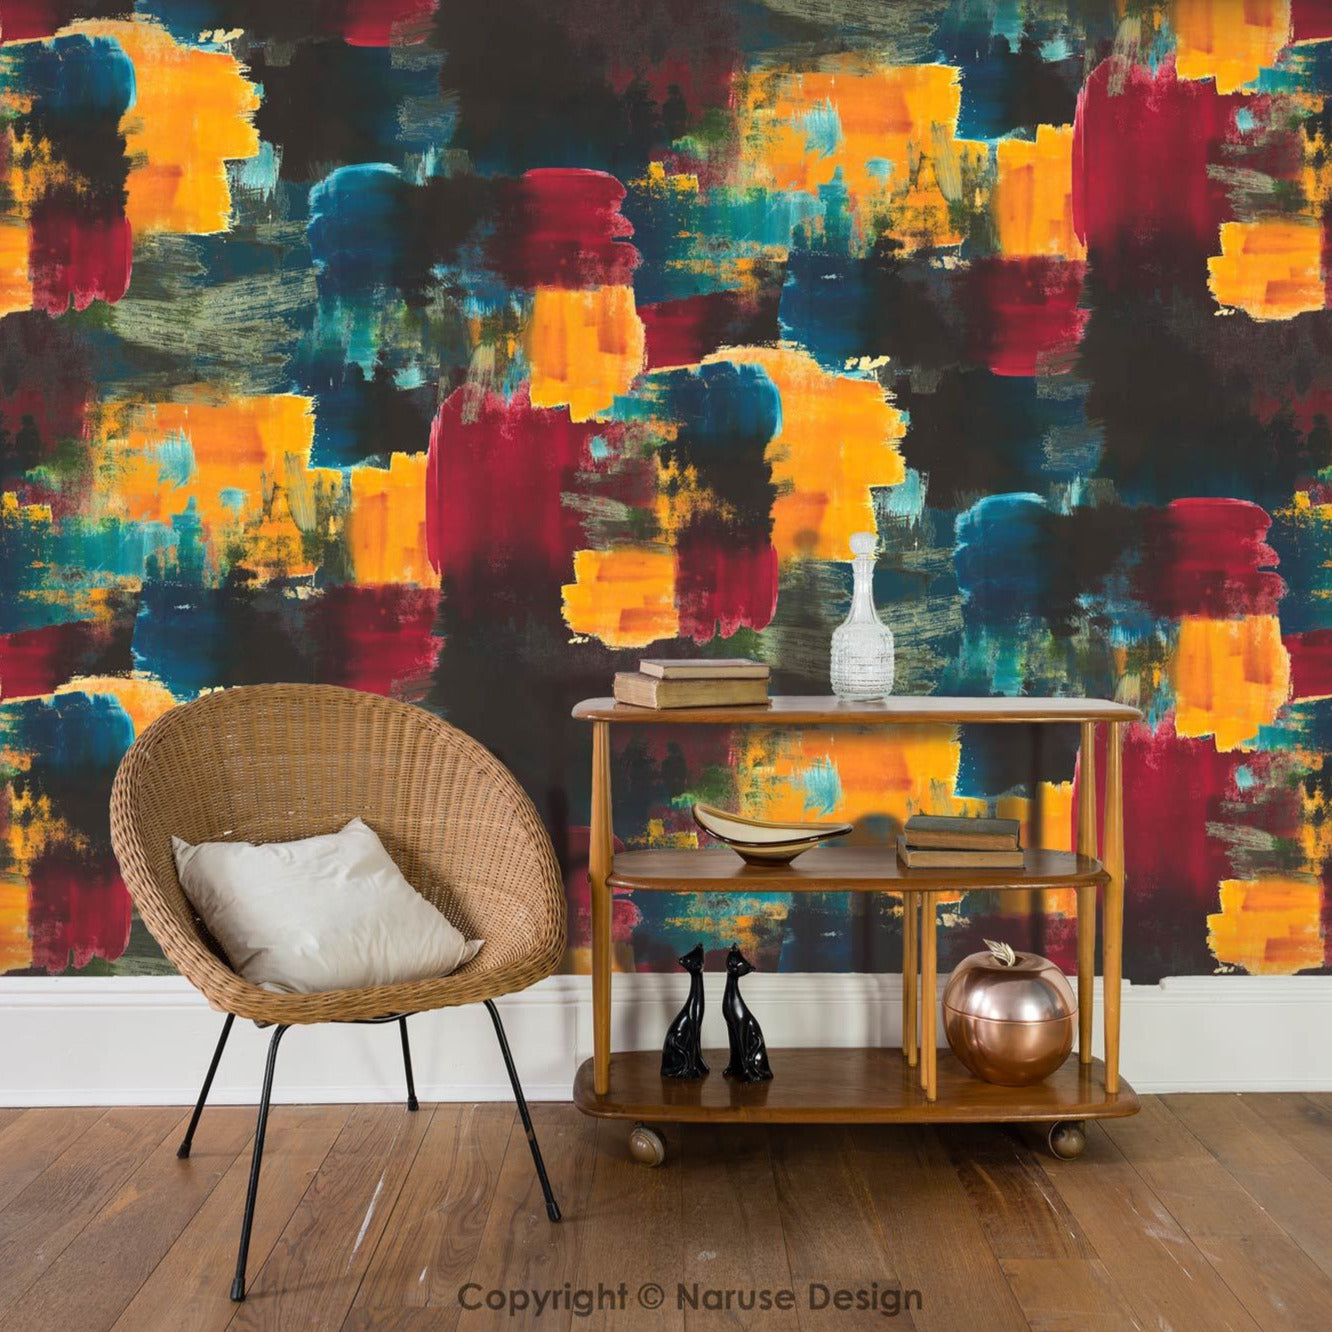 Bright and colourful wallpaper design set in a living room with a chair and table with ornaments. Wallpaper colours are a blend of bright yellow, forest green, bold teal and cyber red.